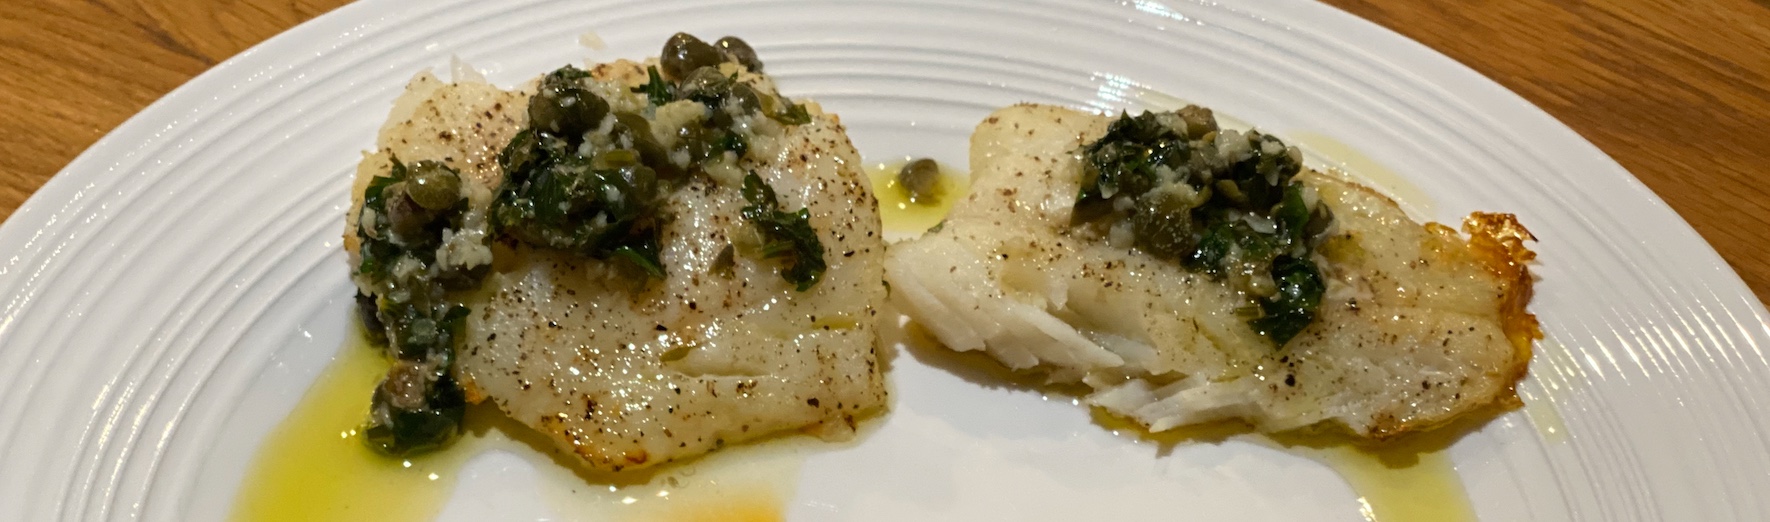 Baked Cod with Lemon & Capers